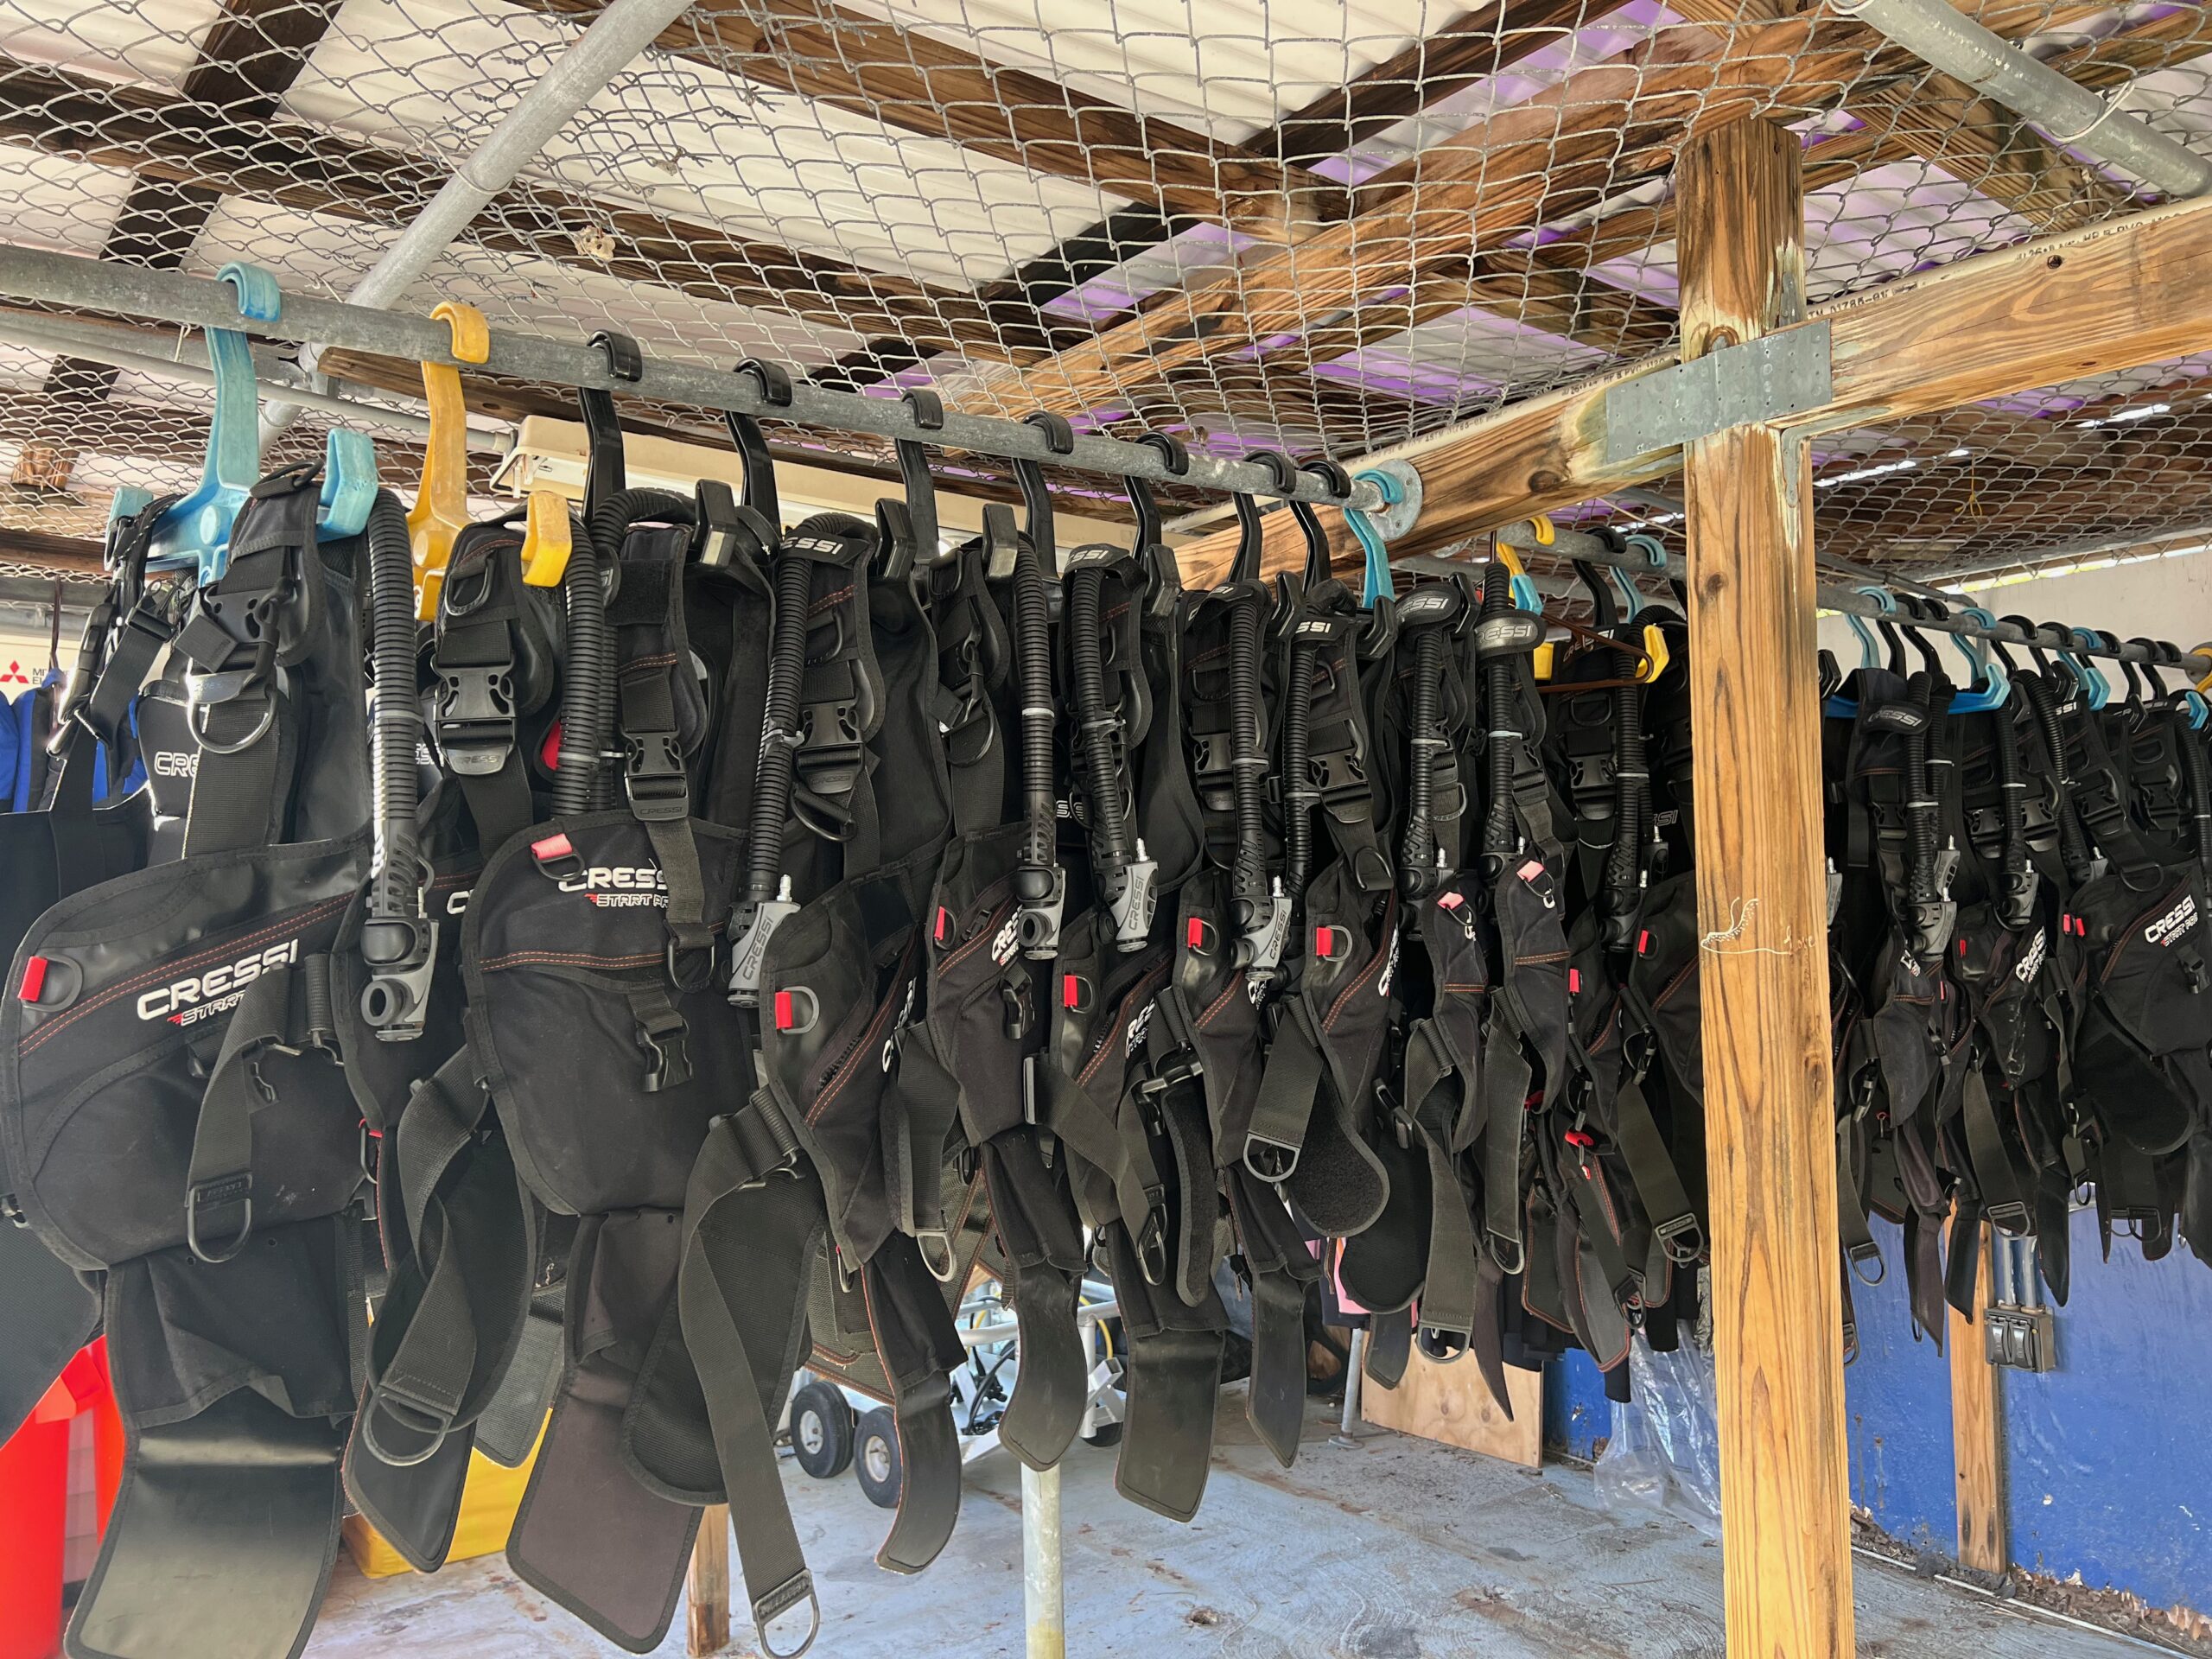 High quality SCUBA equipment for rent. Hanging neatly in storage area at Island Ventures